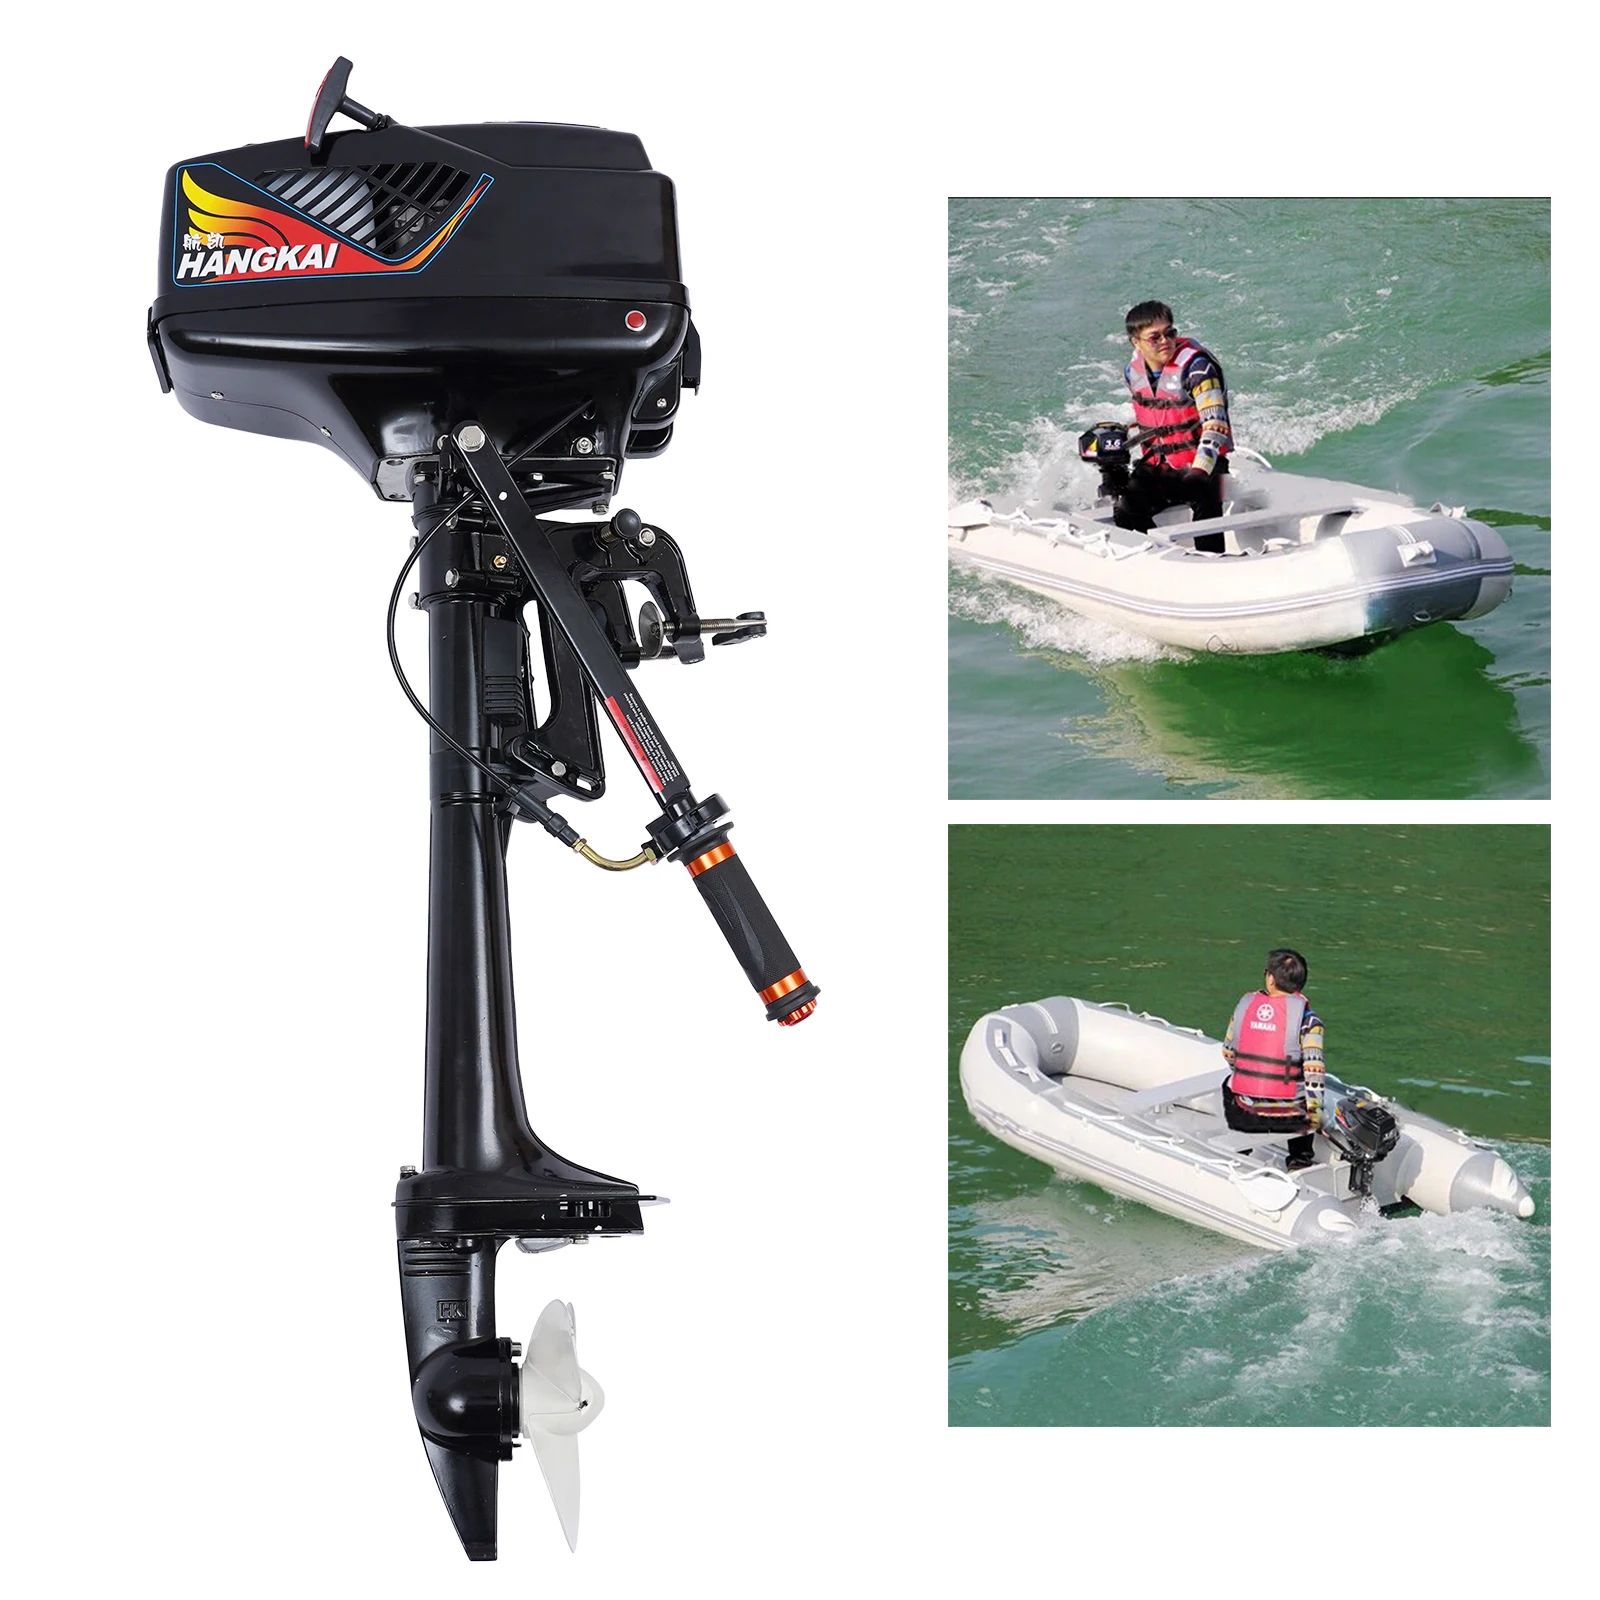 3.6HP 2-Stroke Outboard Motor Fishing Boat Engine Water Cooling System CDI USA High Speed Shipping Outboard Motor Boat Engine automation system high reliability stepper motor injection syringe pump microfluidics